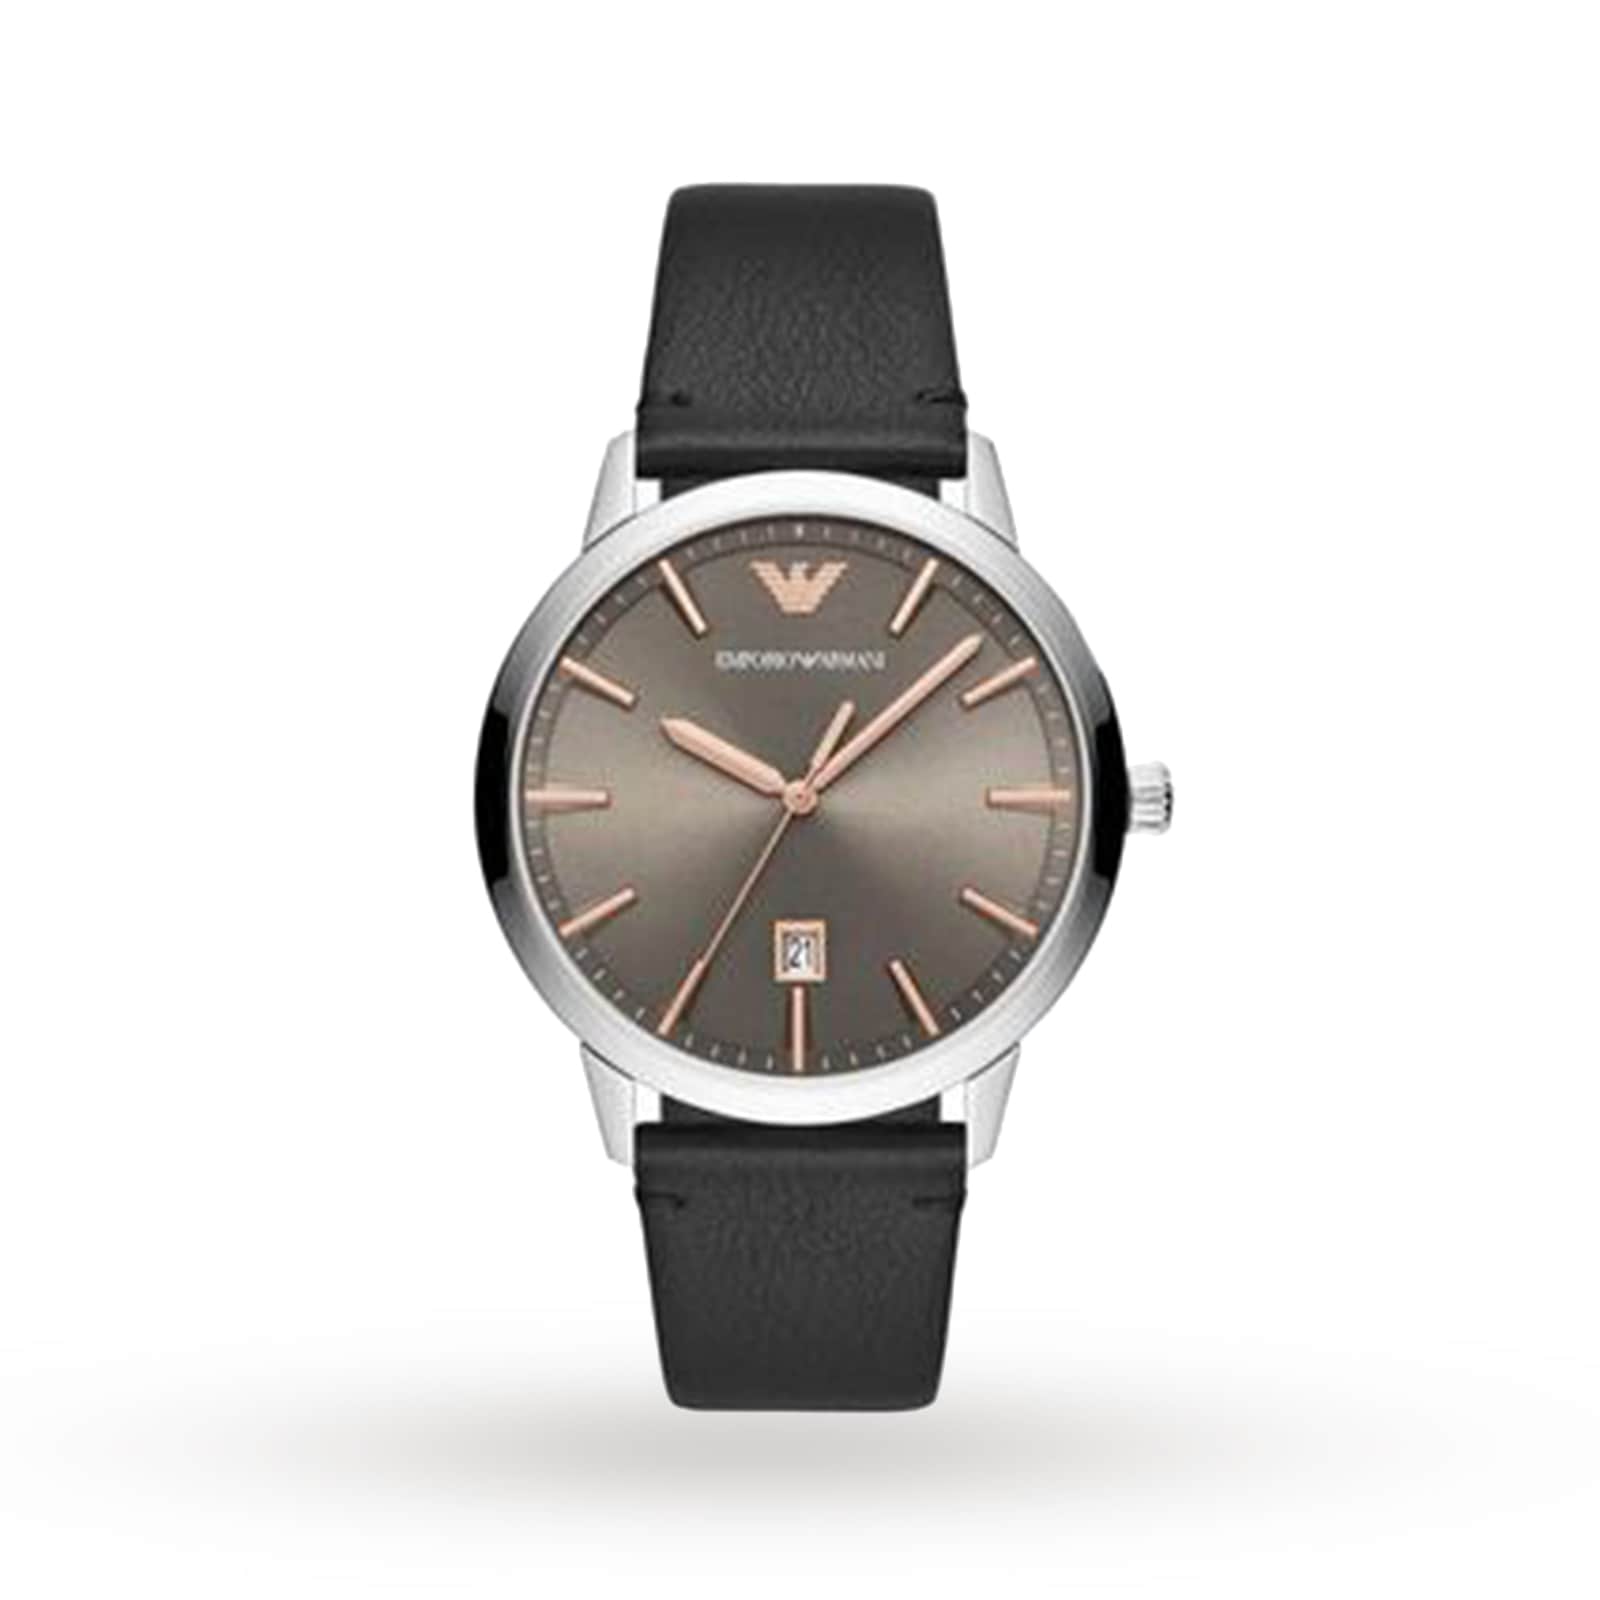 Black Leather Gents Watch